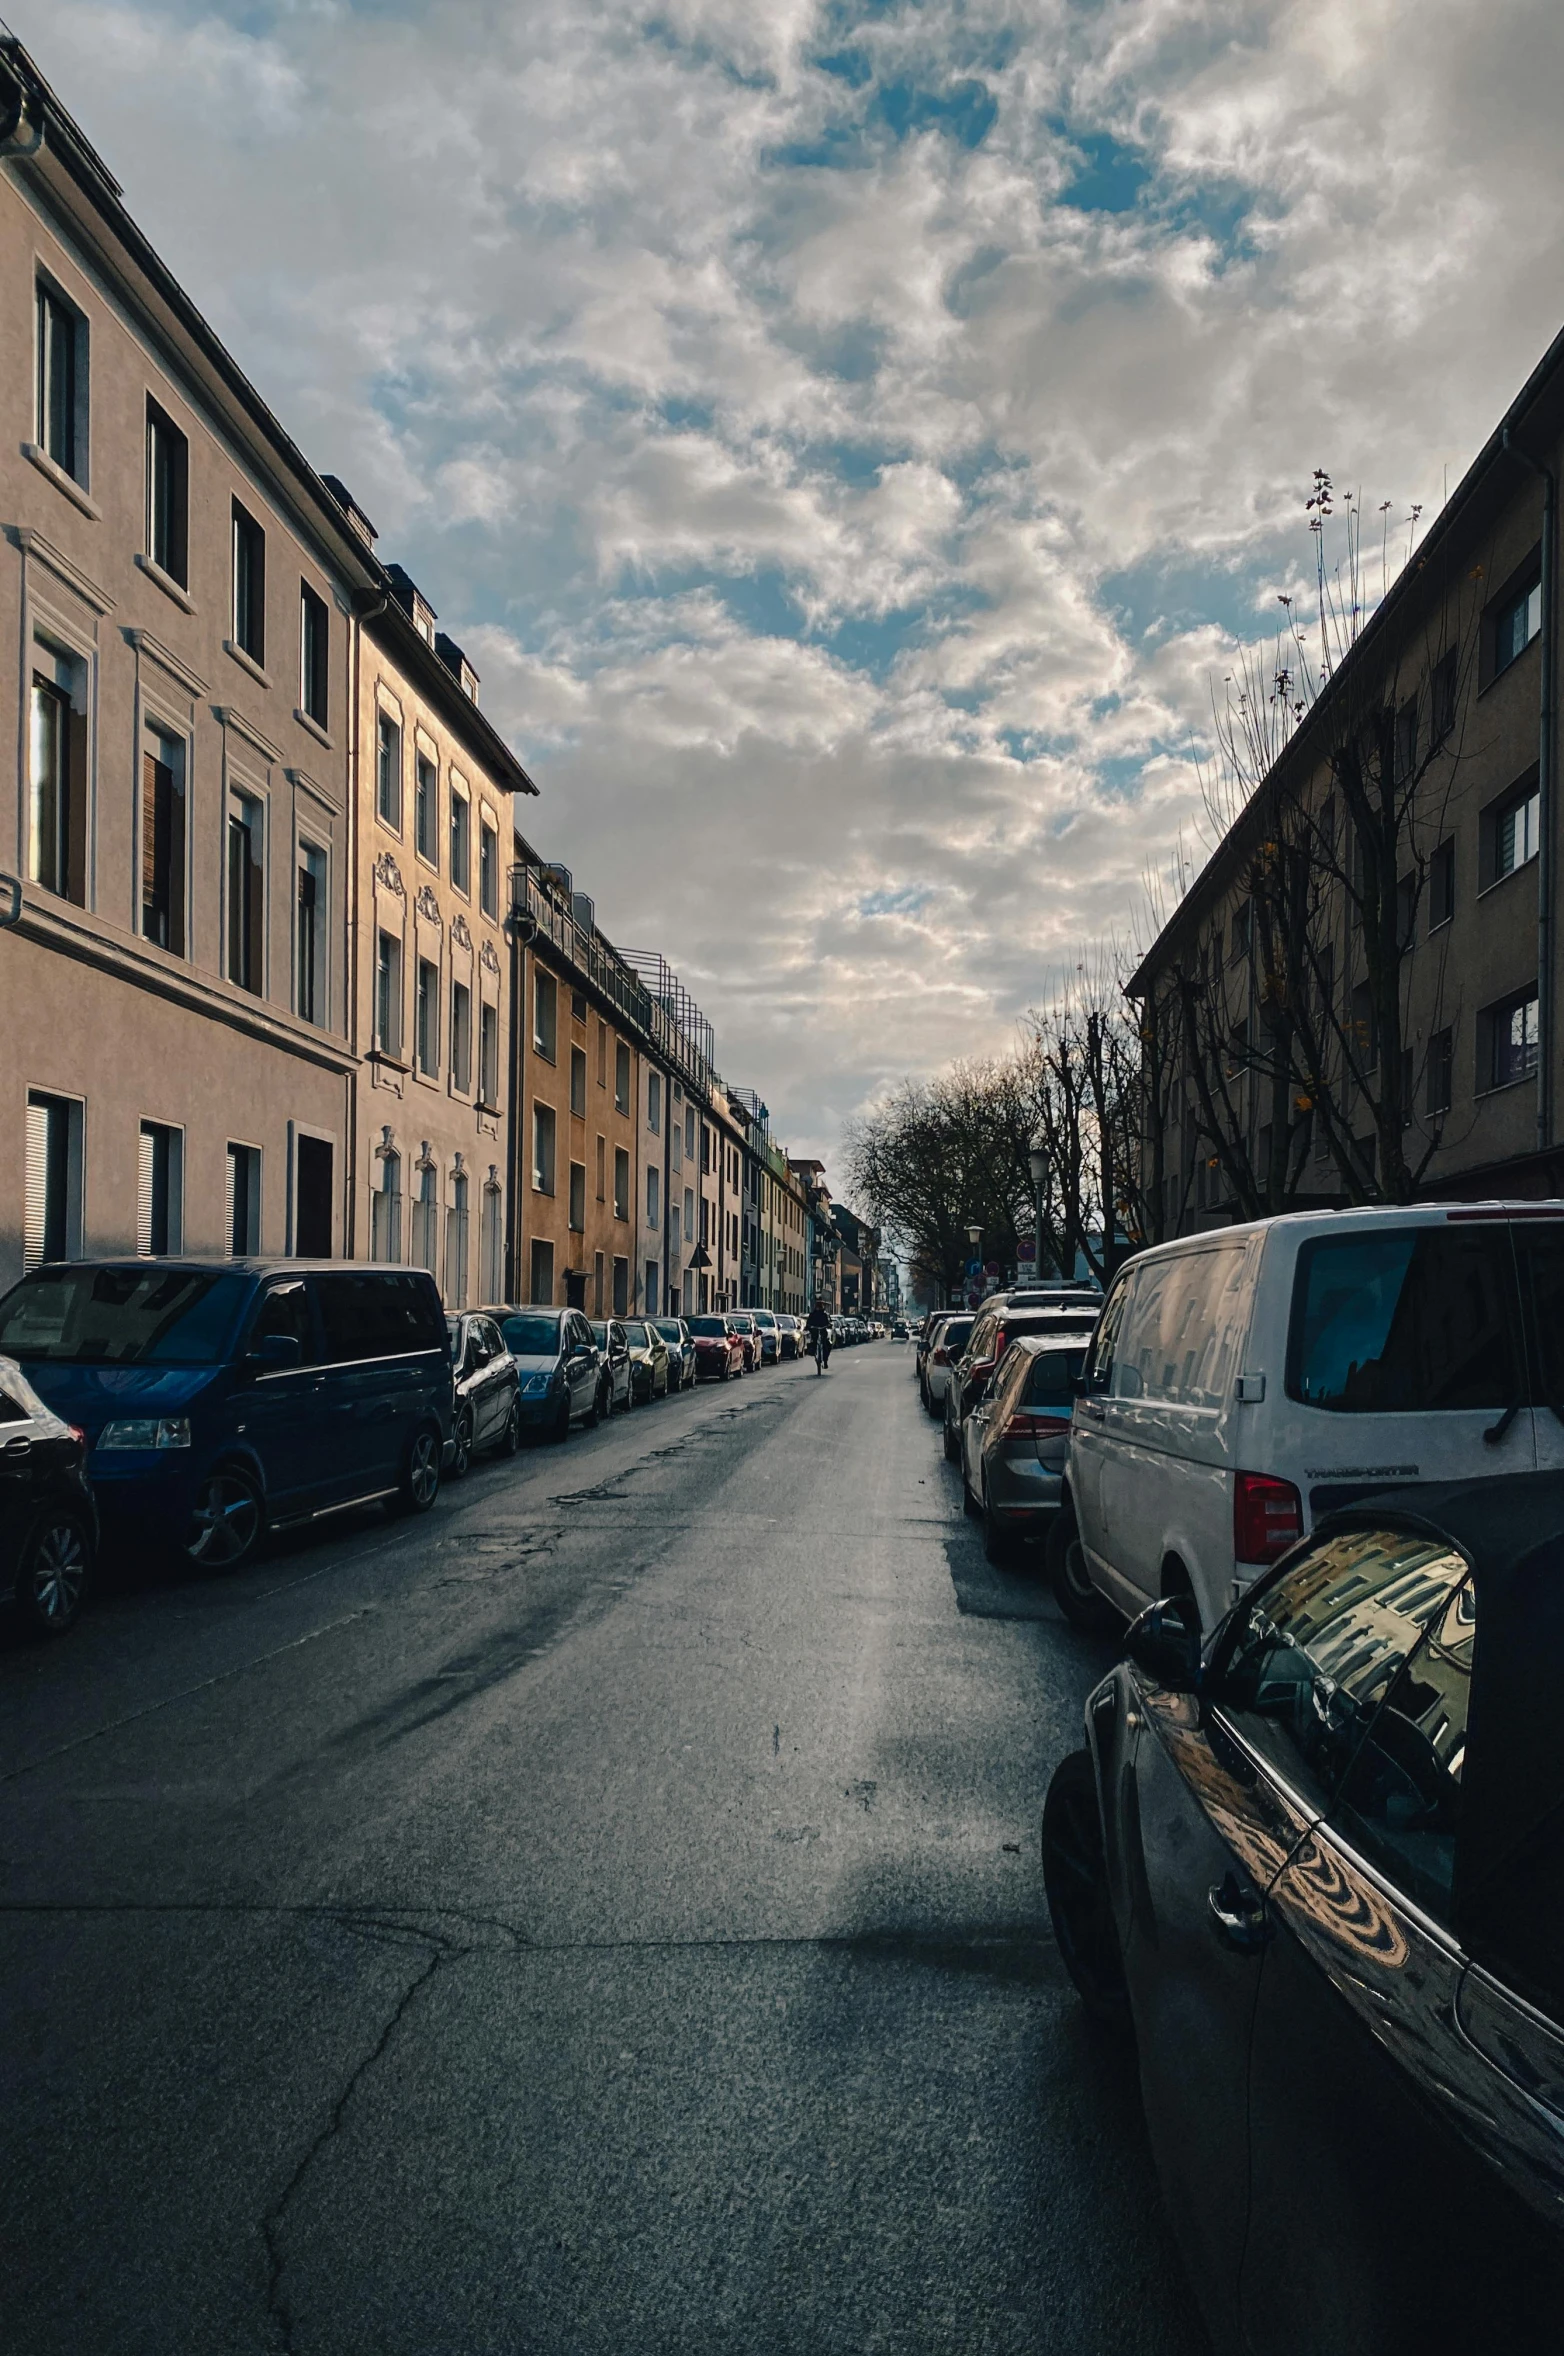 cars parked along the side of a street with a cloudy sky